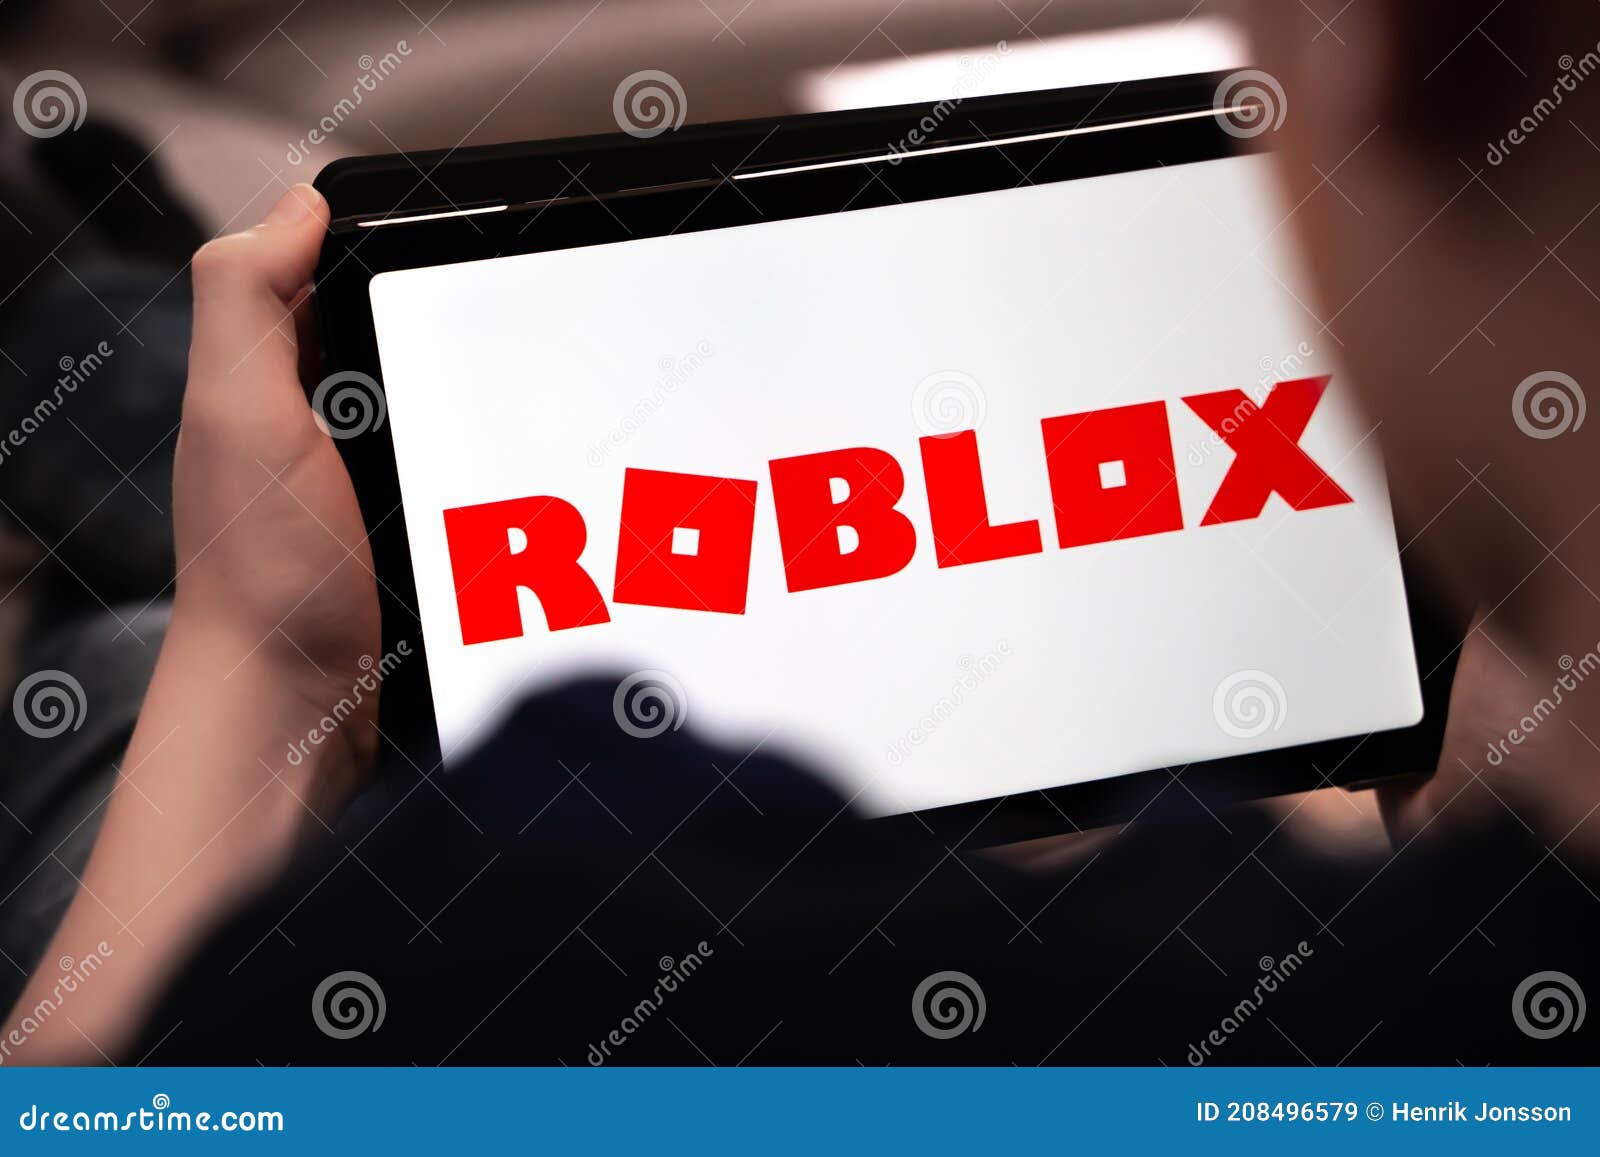 Child Playing Roblox On A Tablet Shallow Depth Of Field Editorial Stock Image Image Of Online High 208496579 - roblox tablet